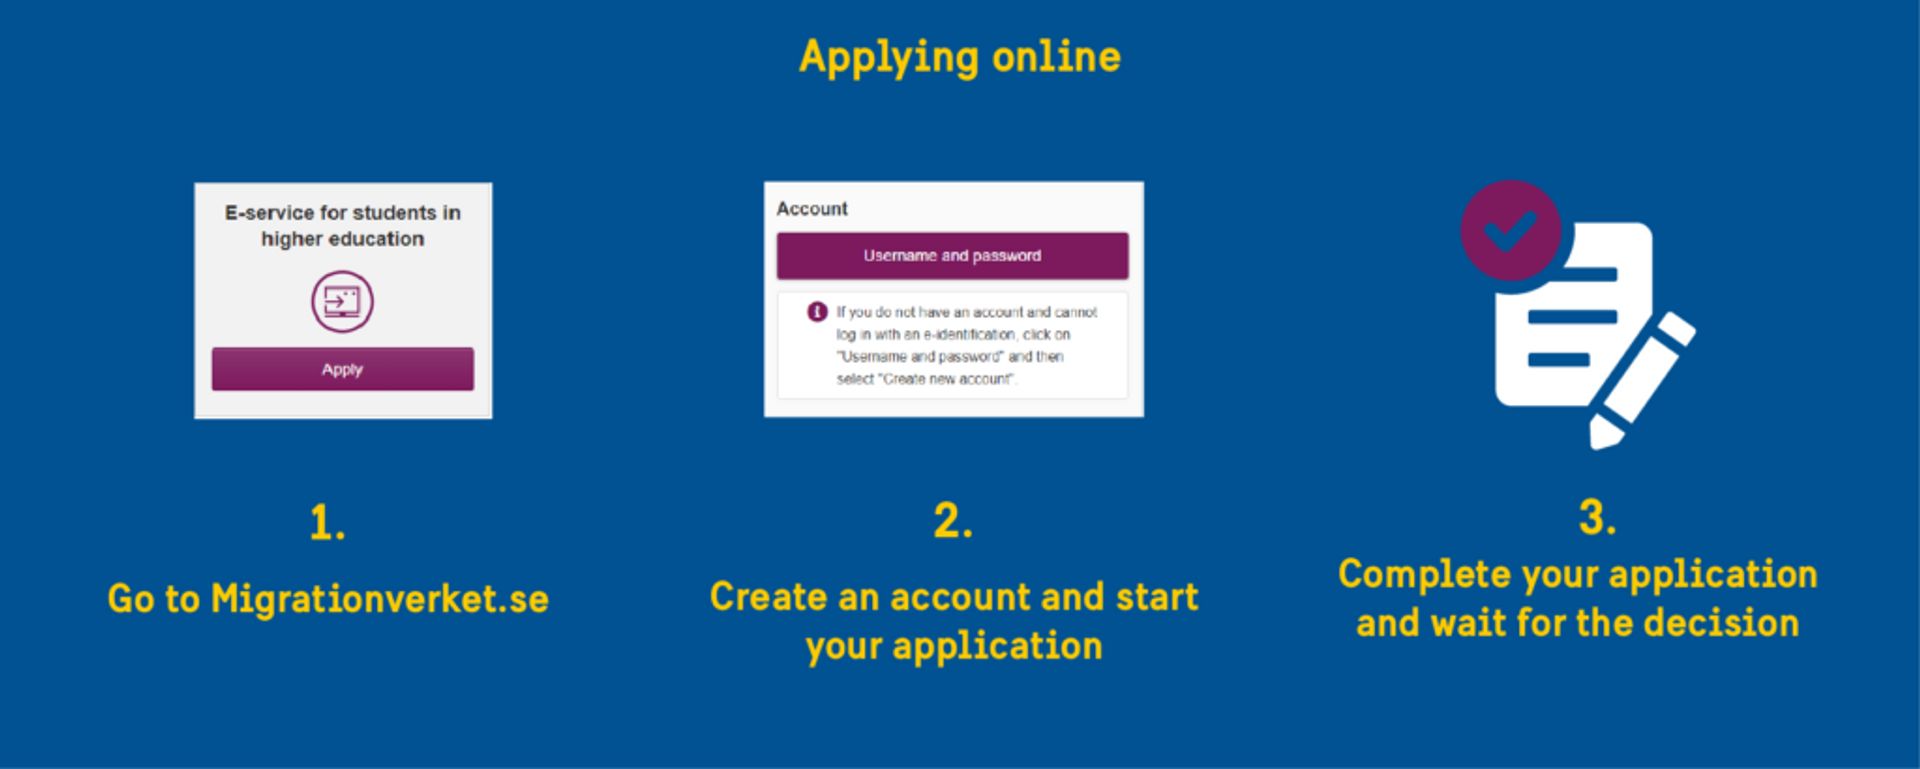 Illustration showing the steps of applying for your residence permit online: go to the Swedish Migration Agency's website, create an account, then complete your application and wait for the decision.